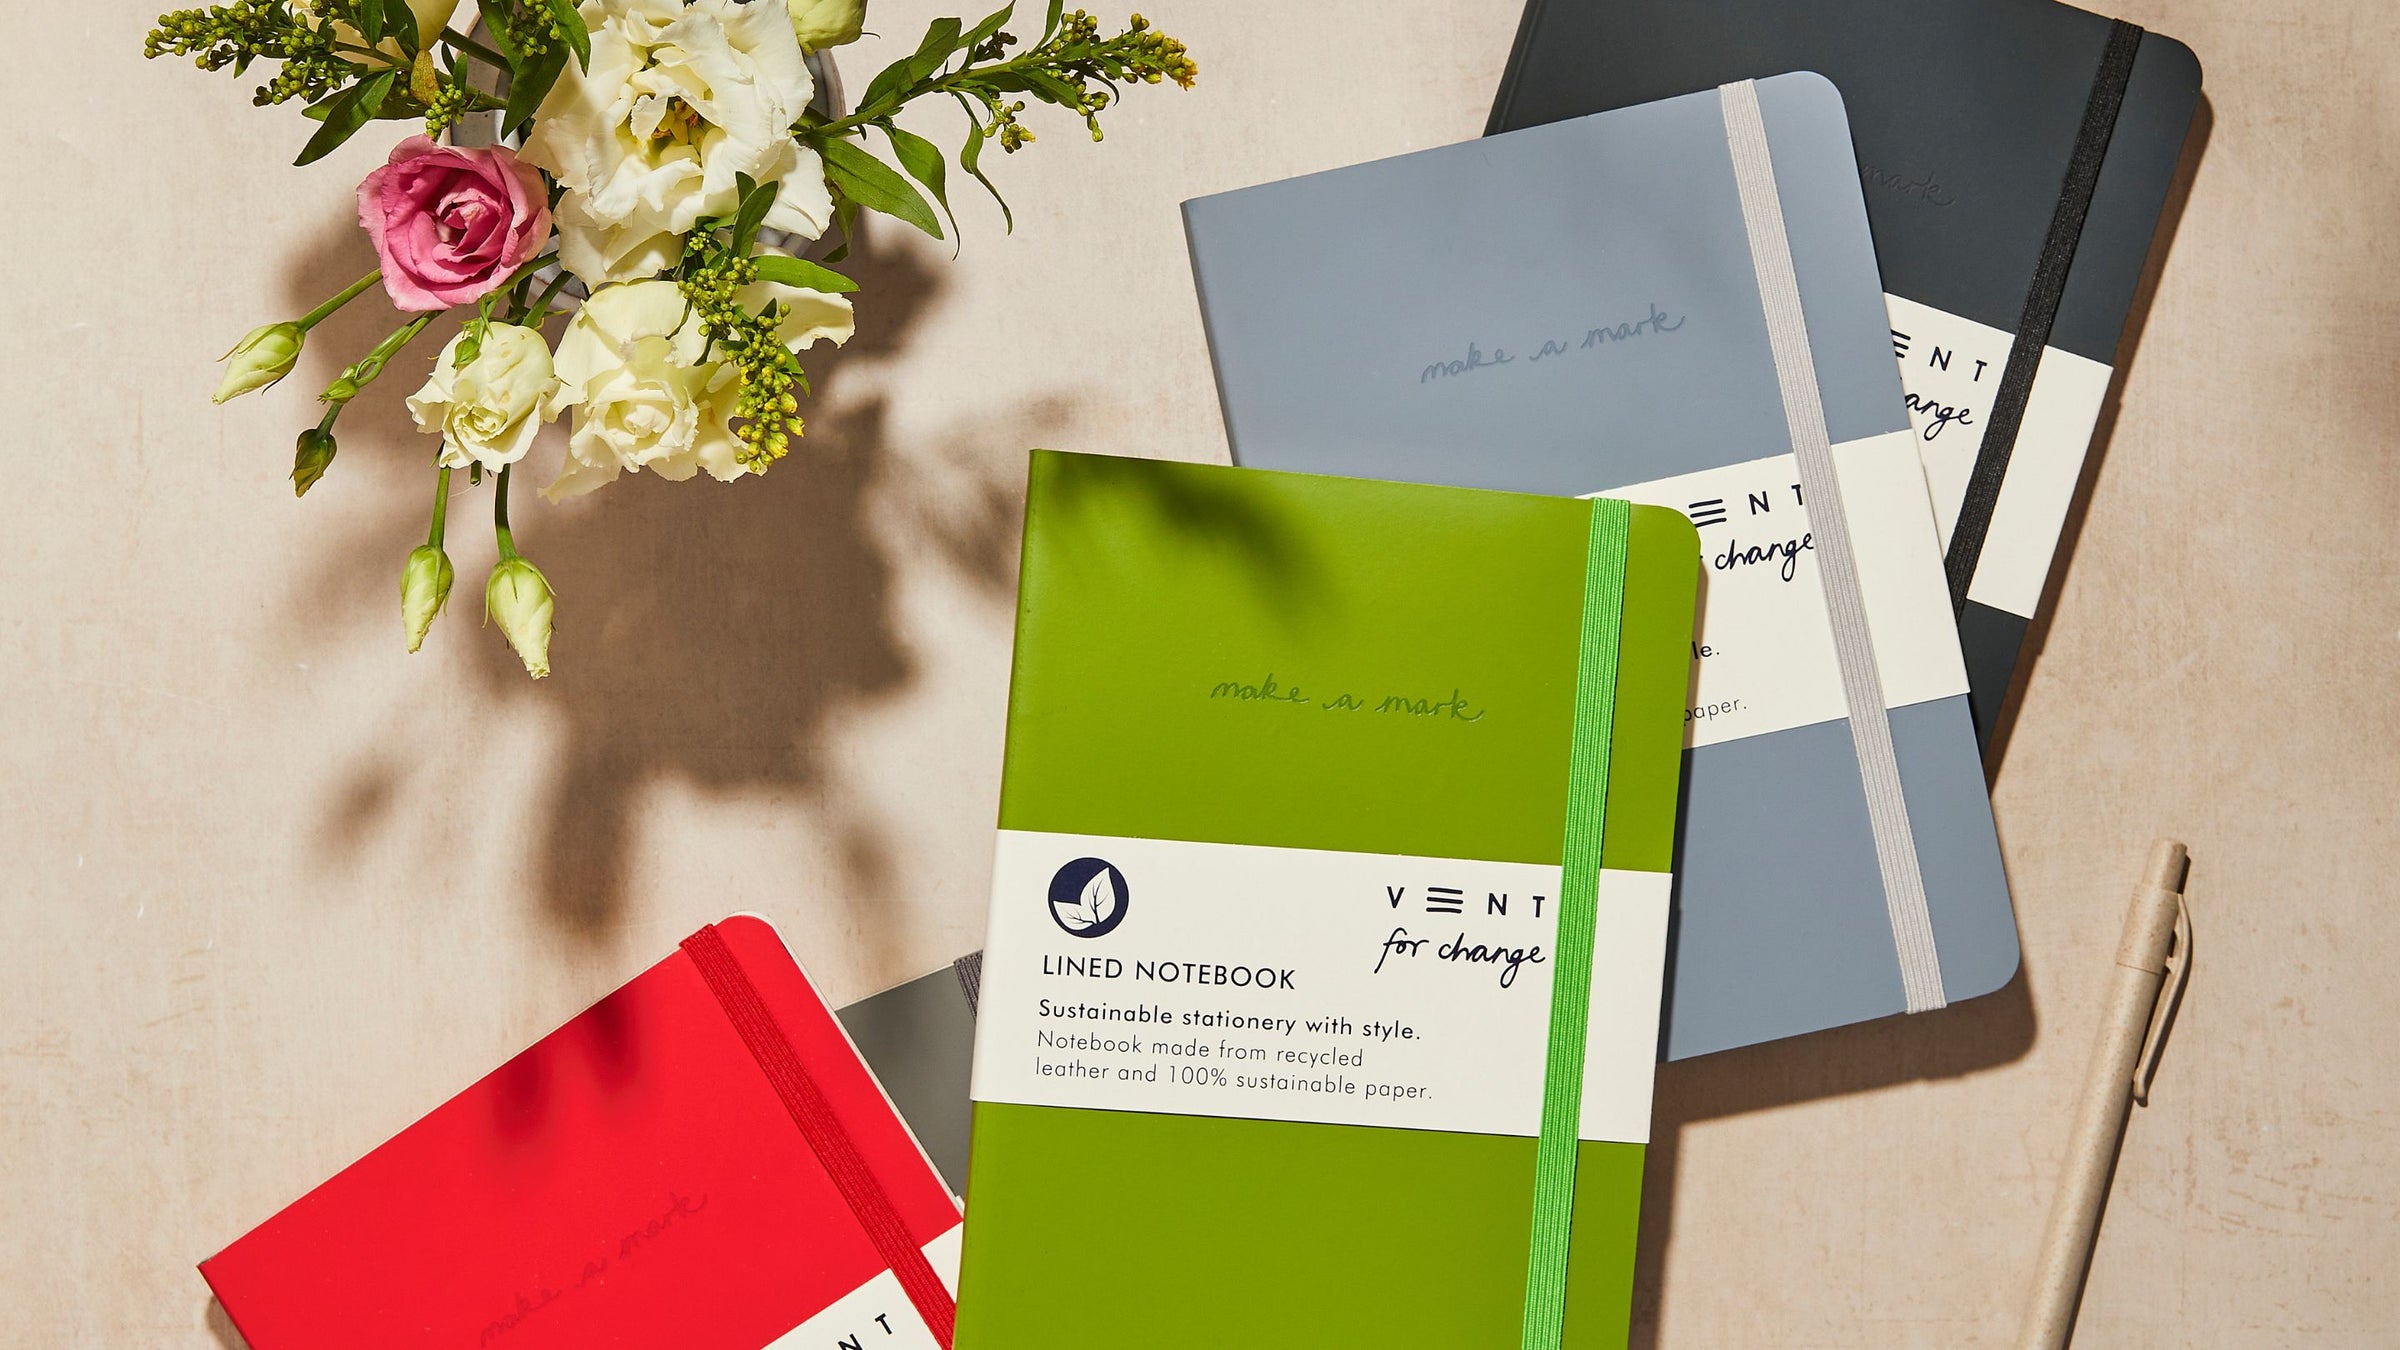 Eco-friendly stationery featuring notepads, notebooks, refillable pens and flowers on a green background